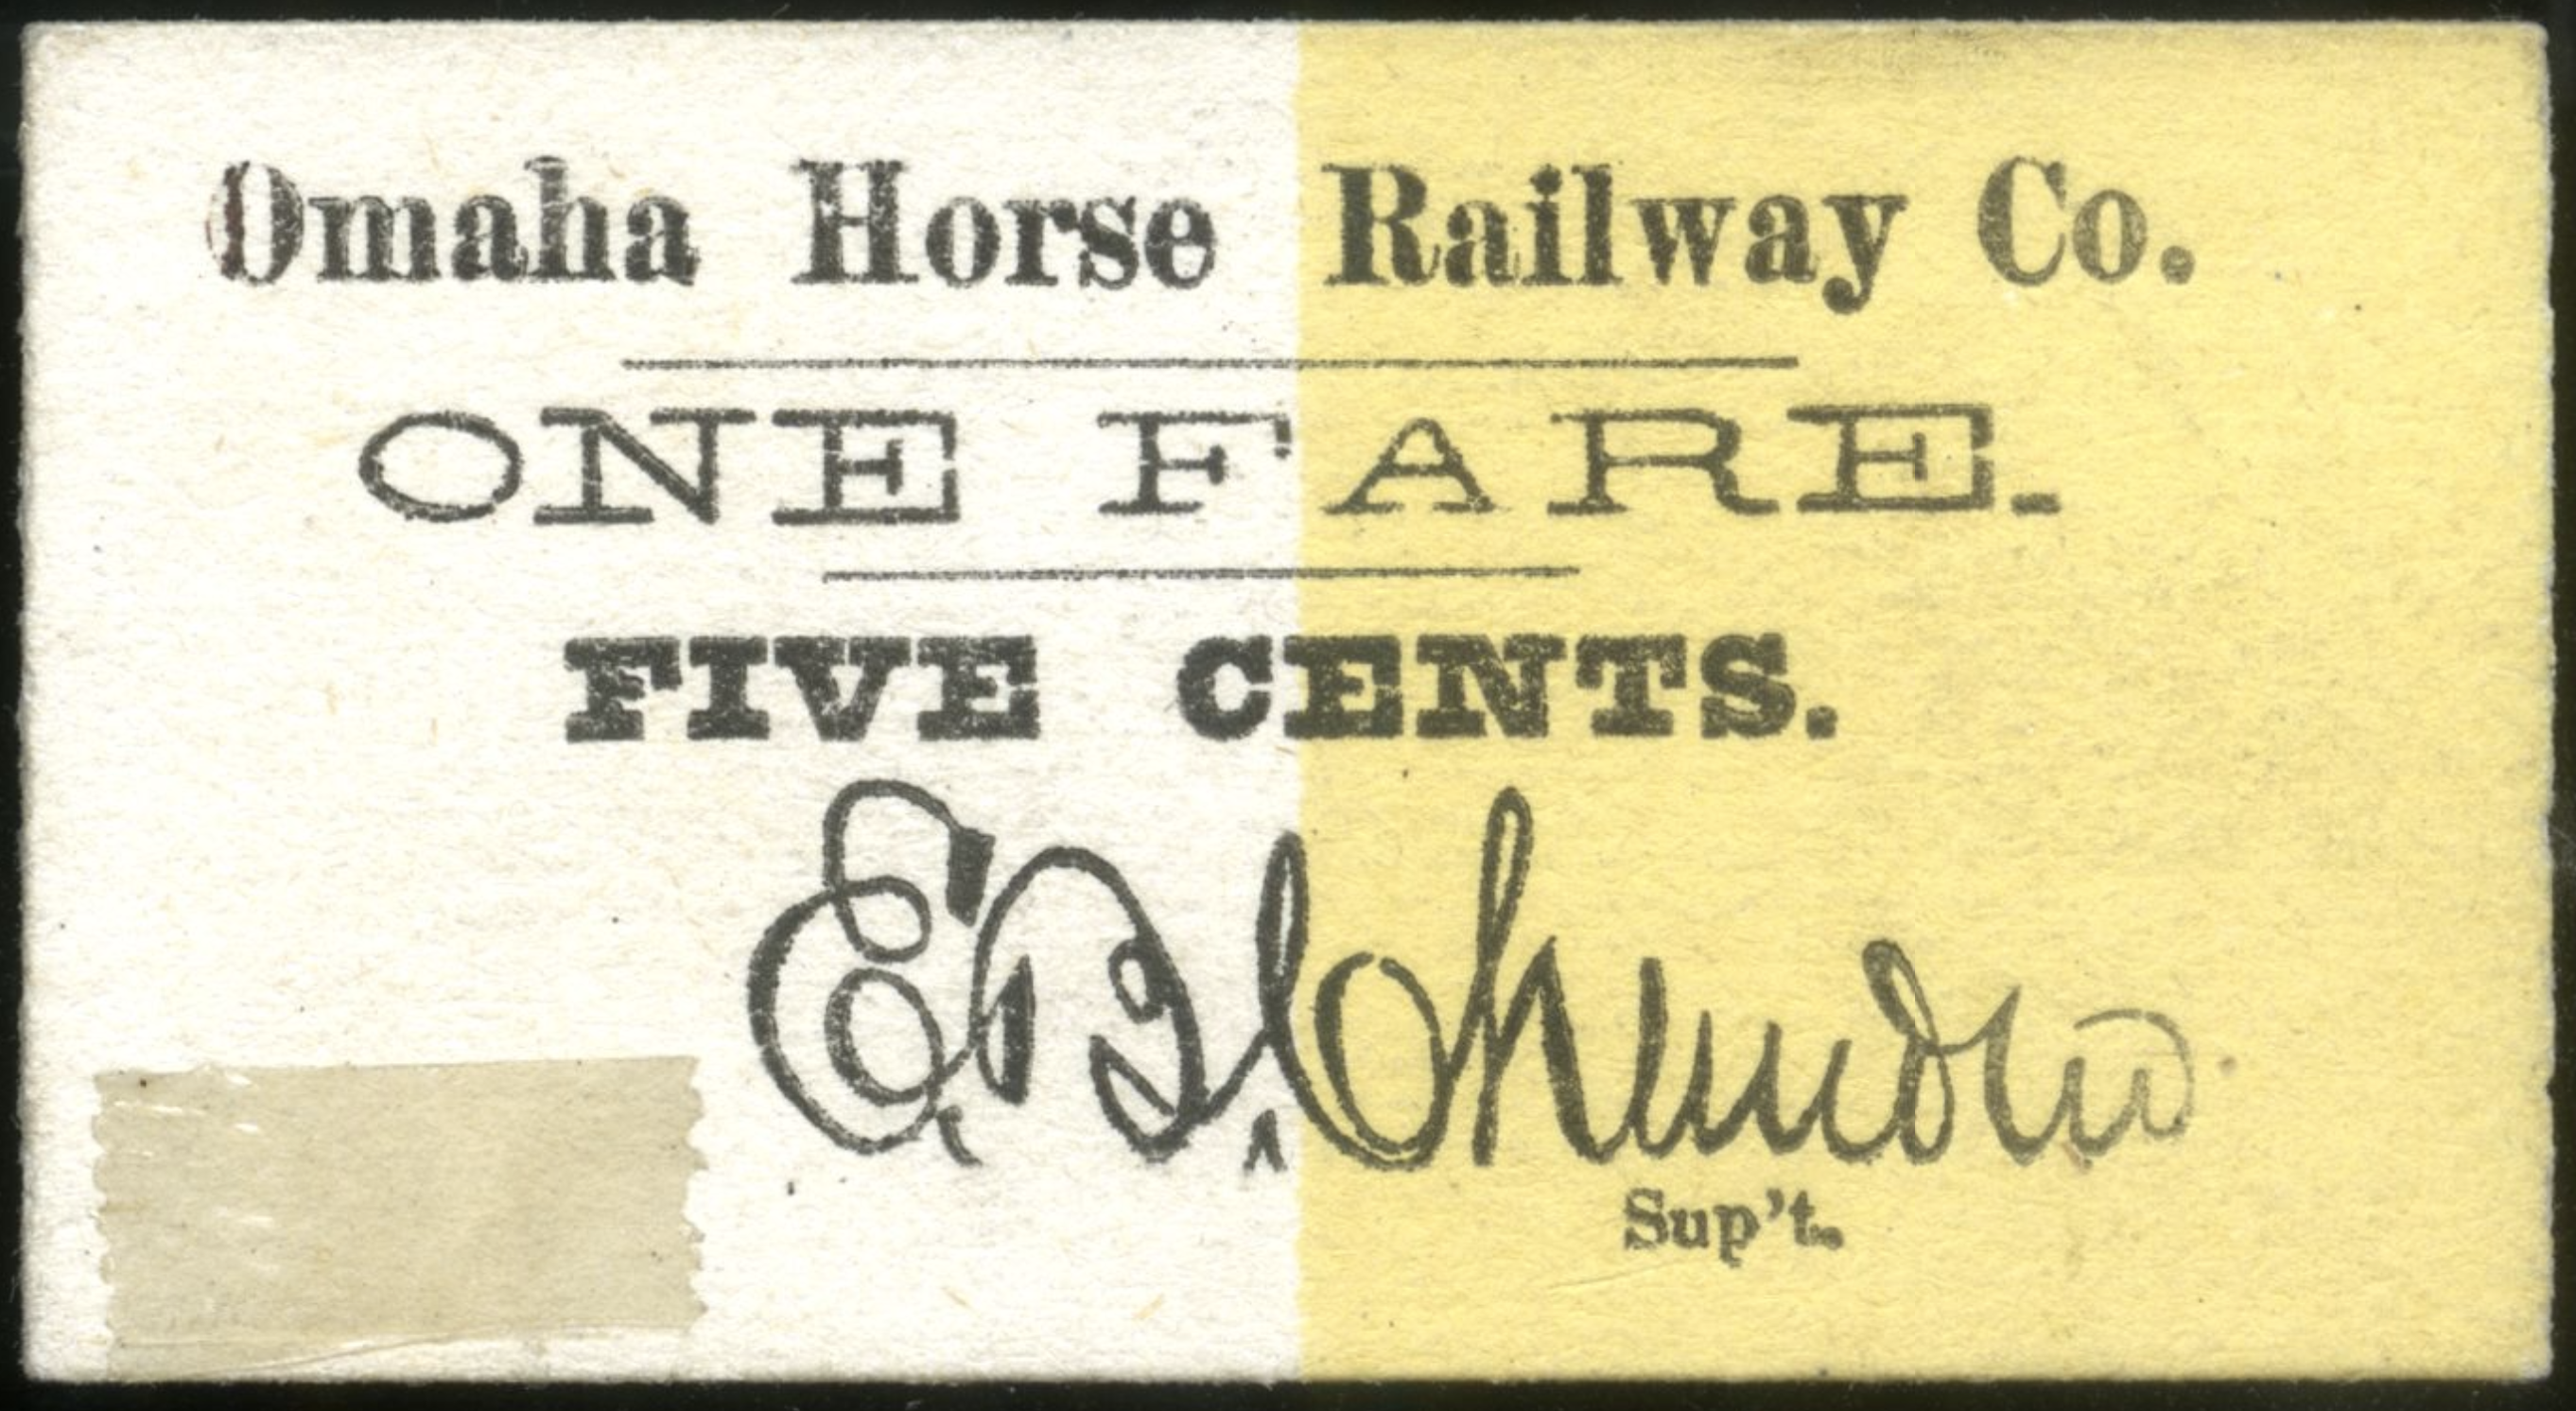 This is an early ticket to ride the Omaha Horse Railway. Courtesy of the Durham Museum.